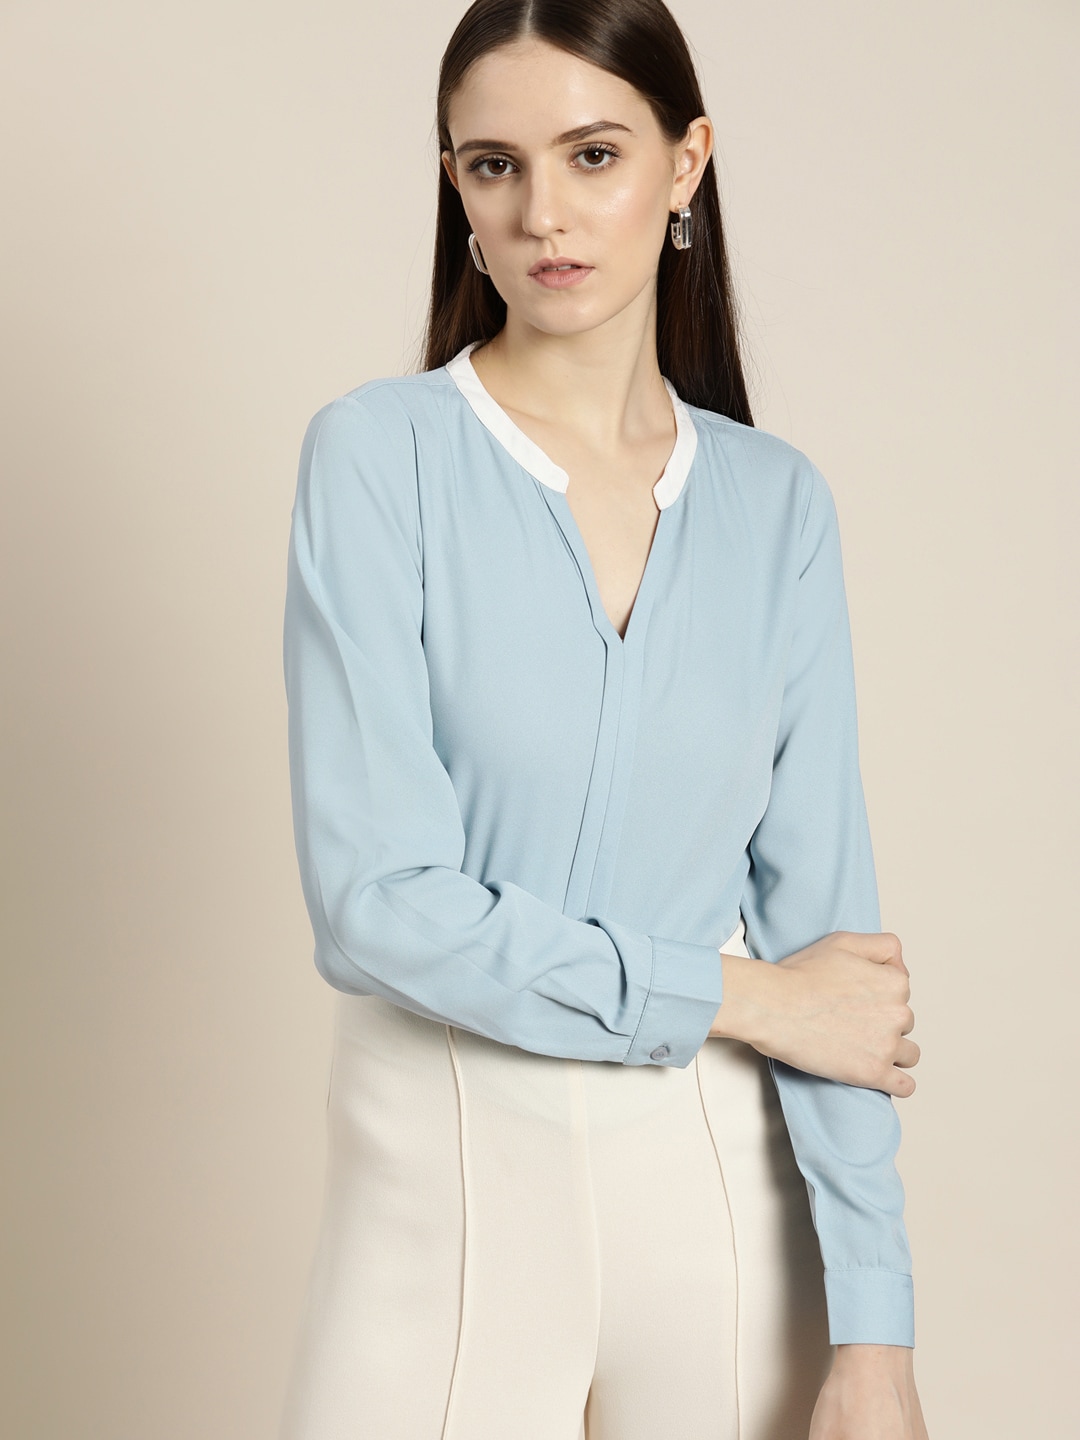 INVICTUS Blue Shirt Style Top Price in India